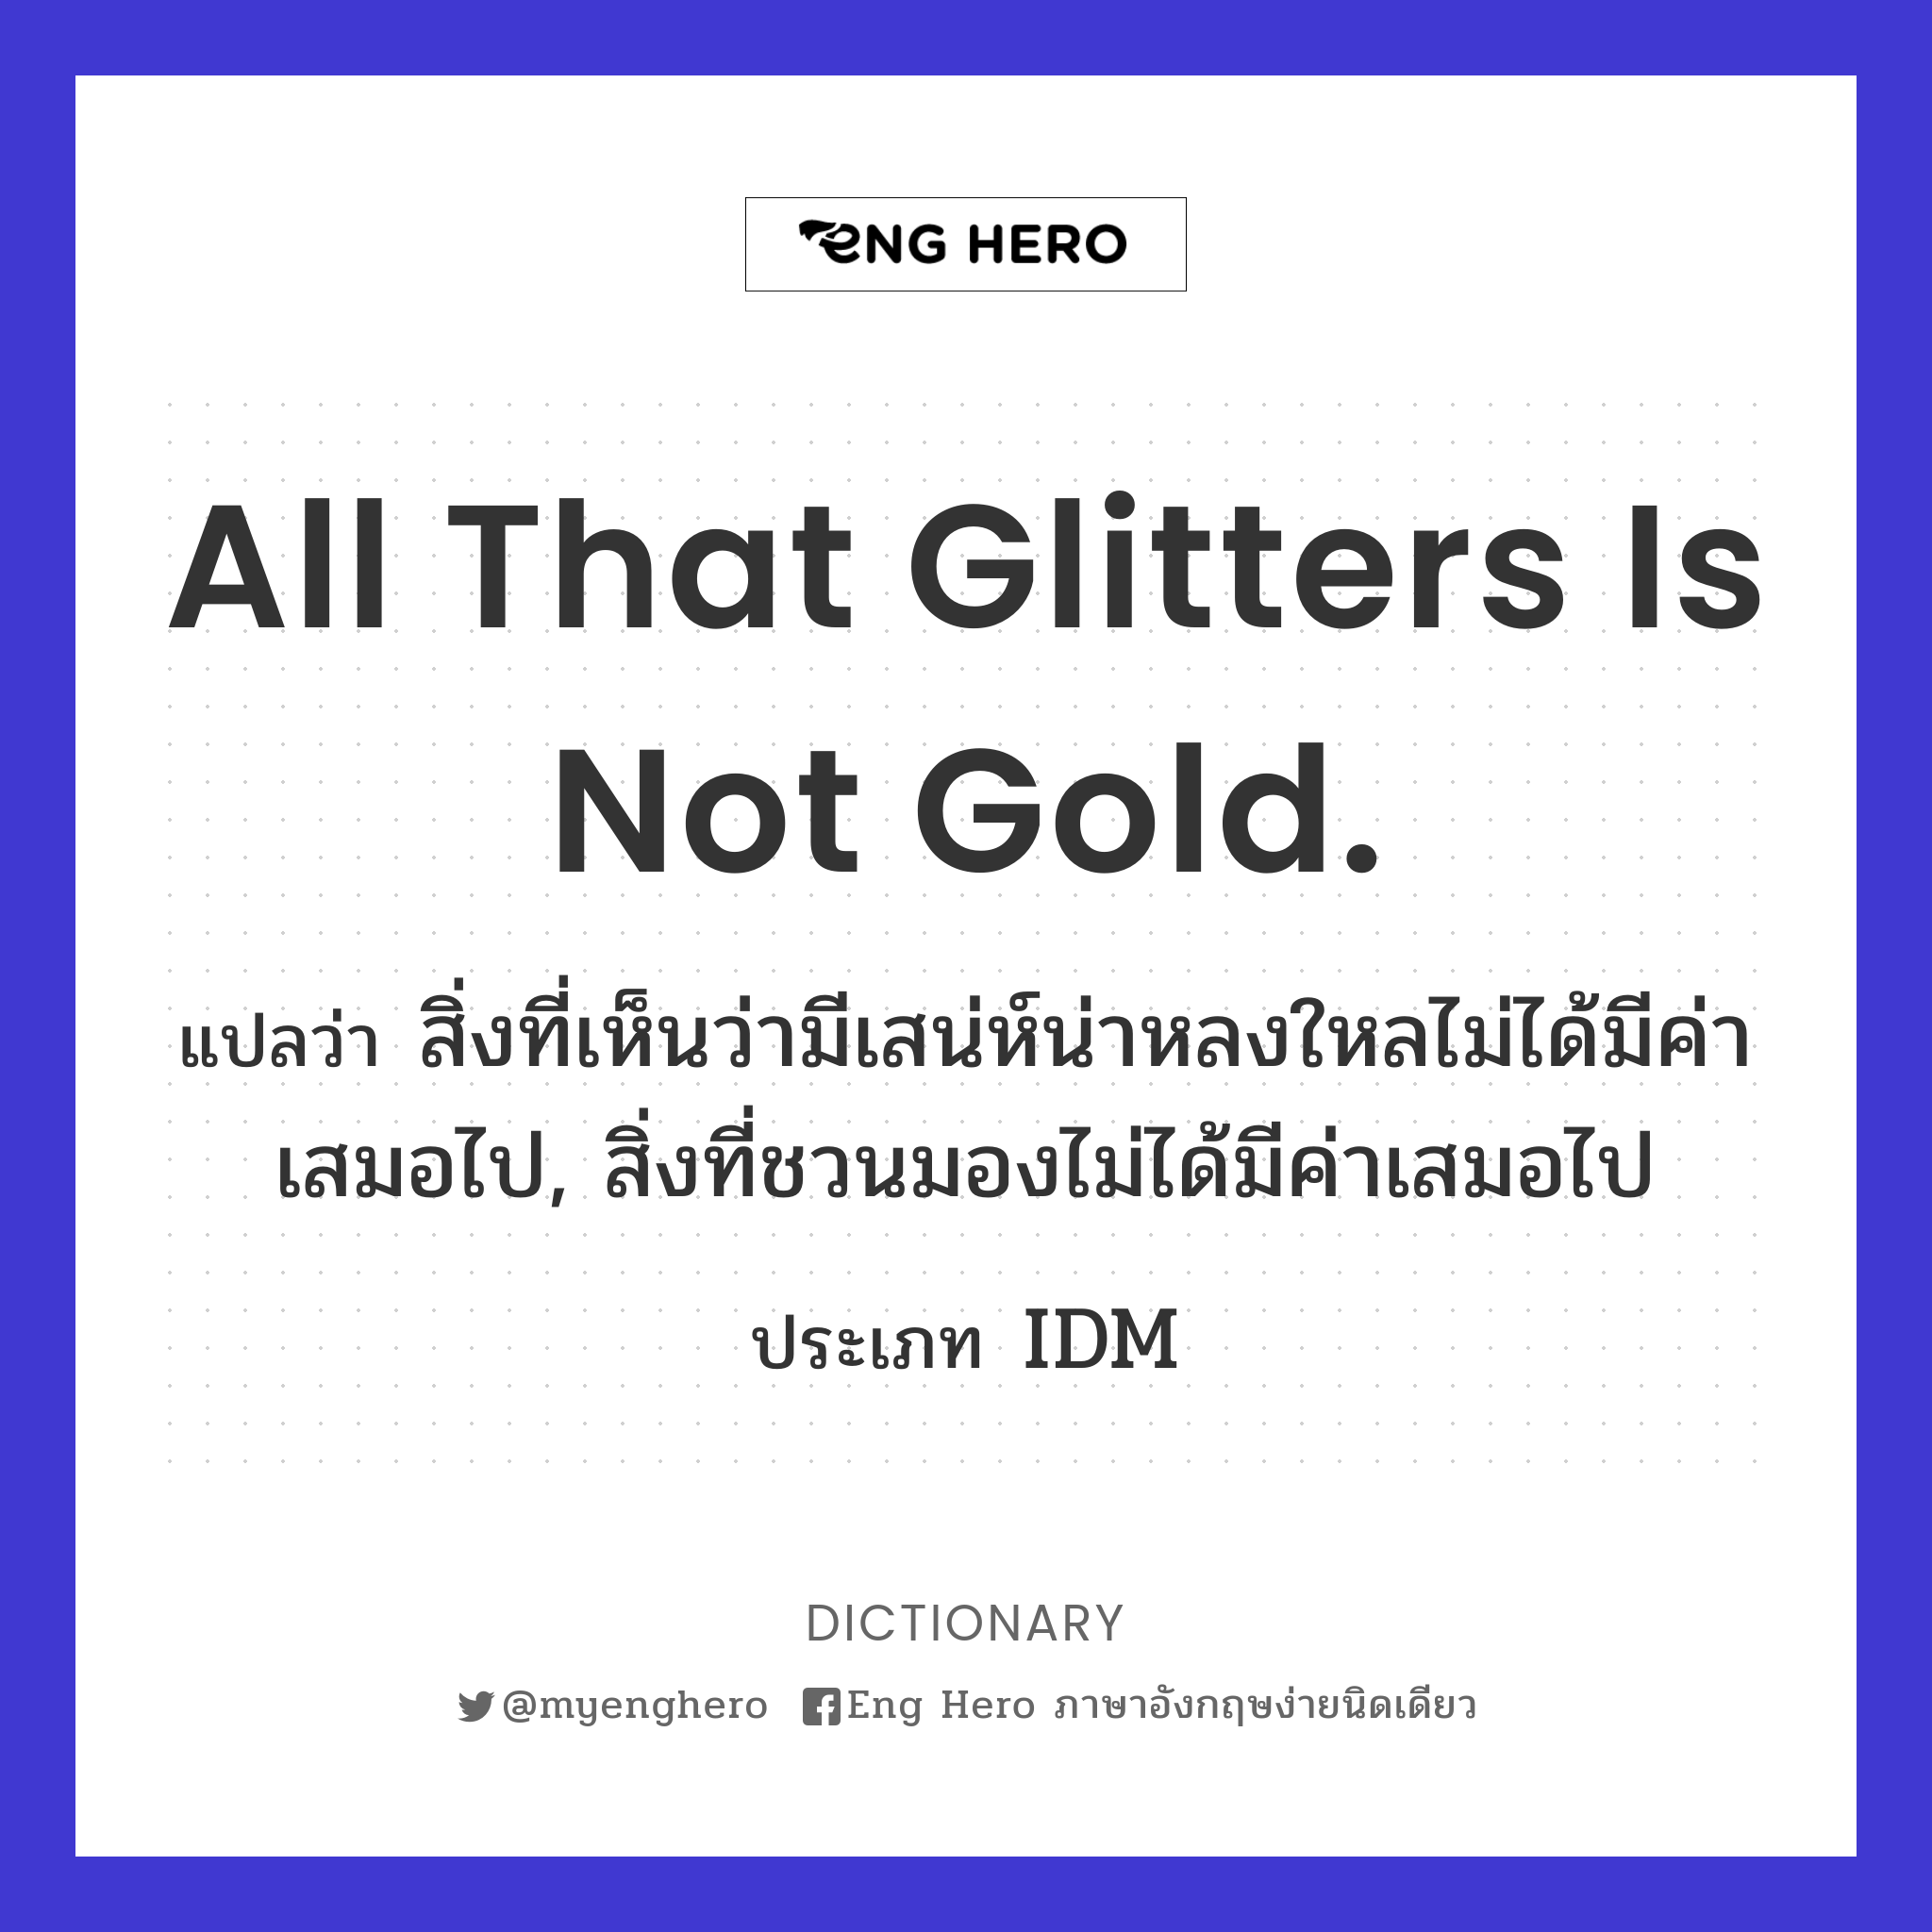 All that glitters is not gold.